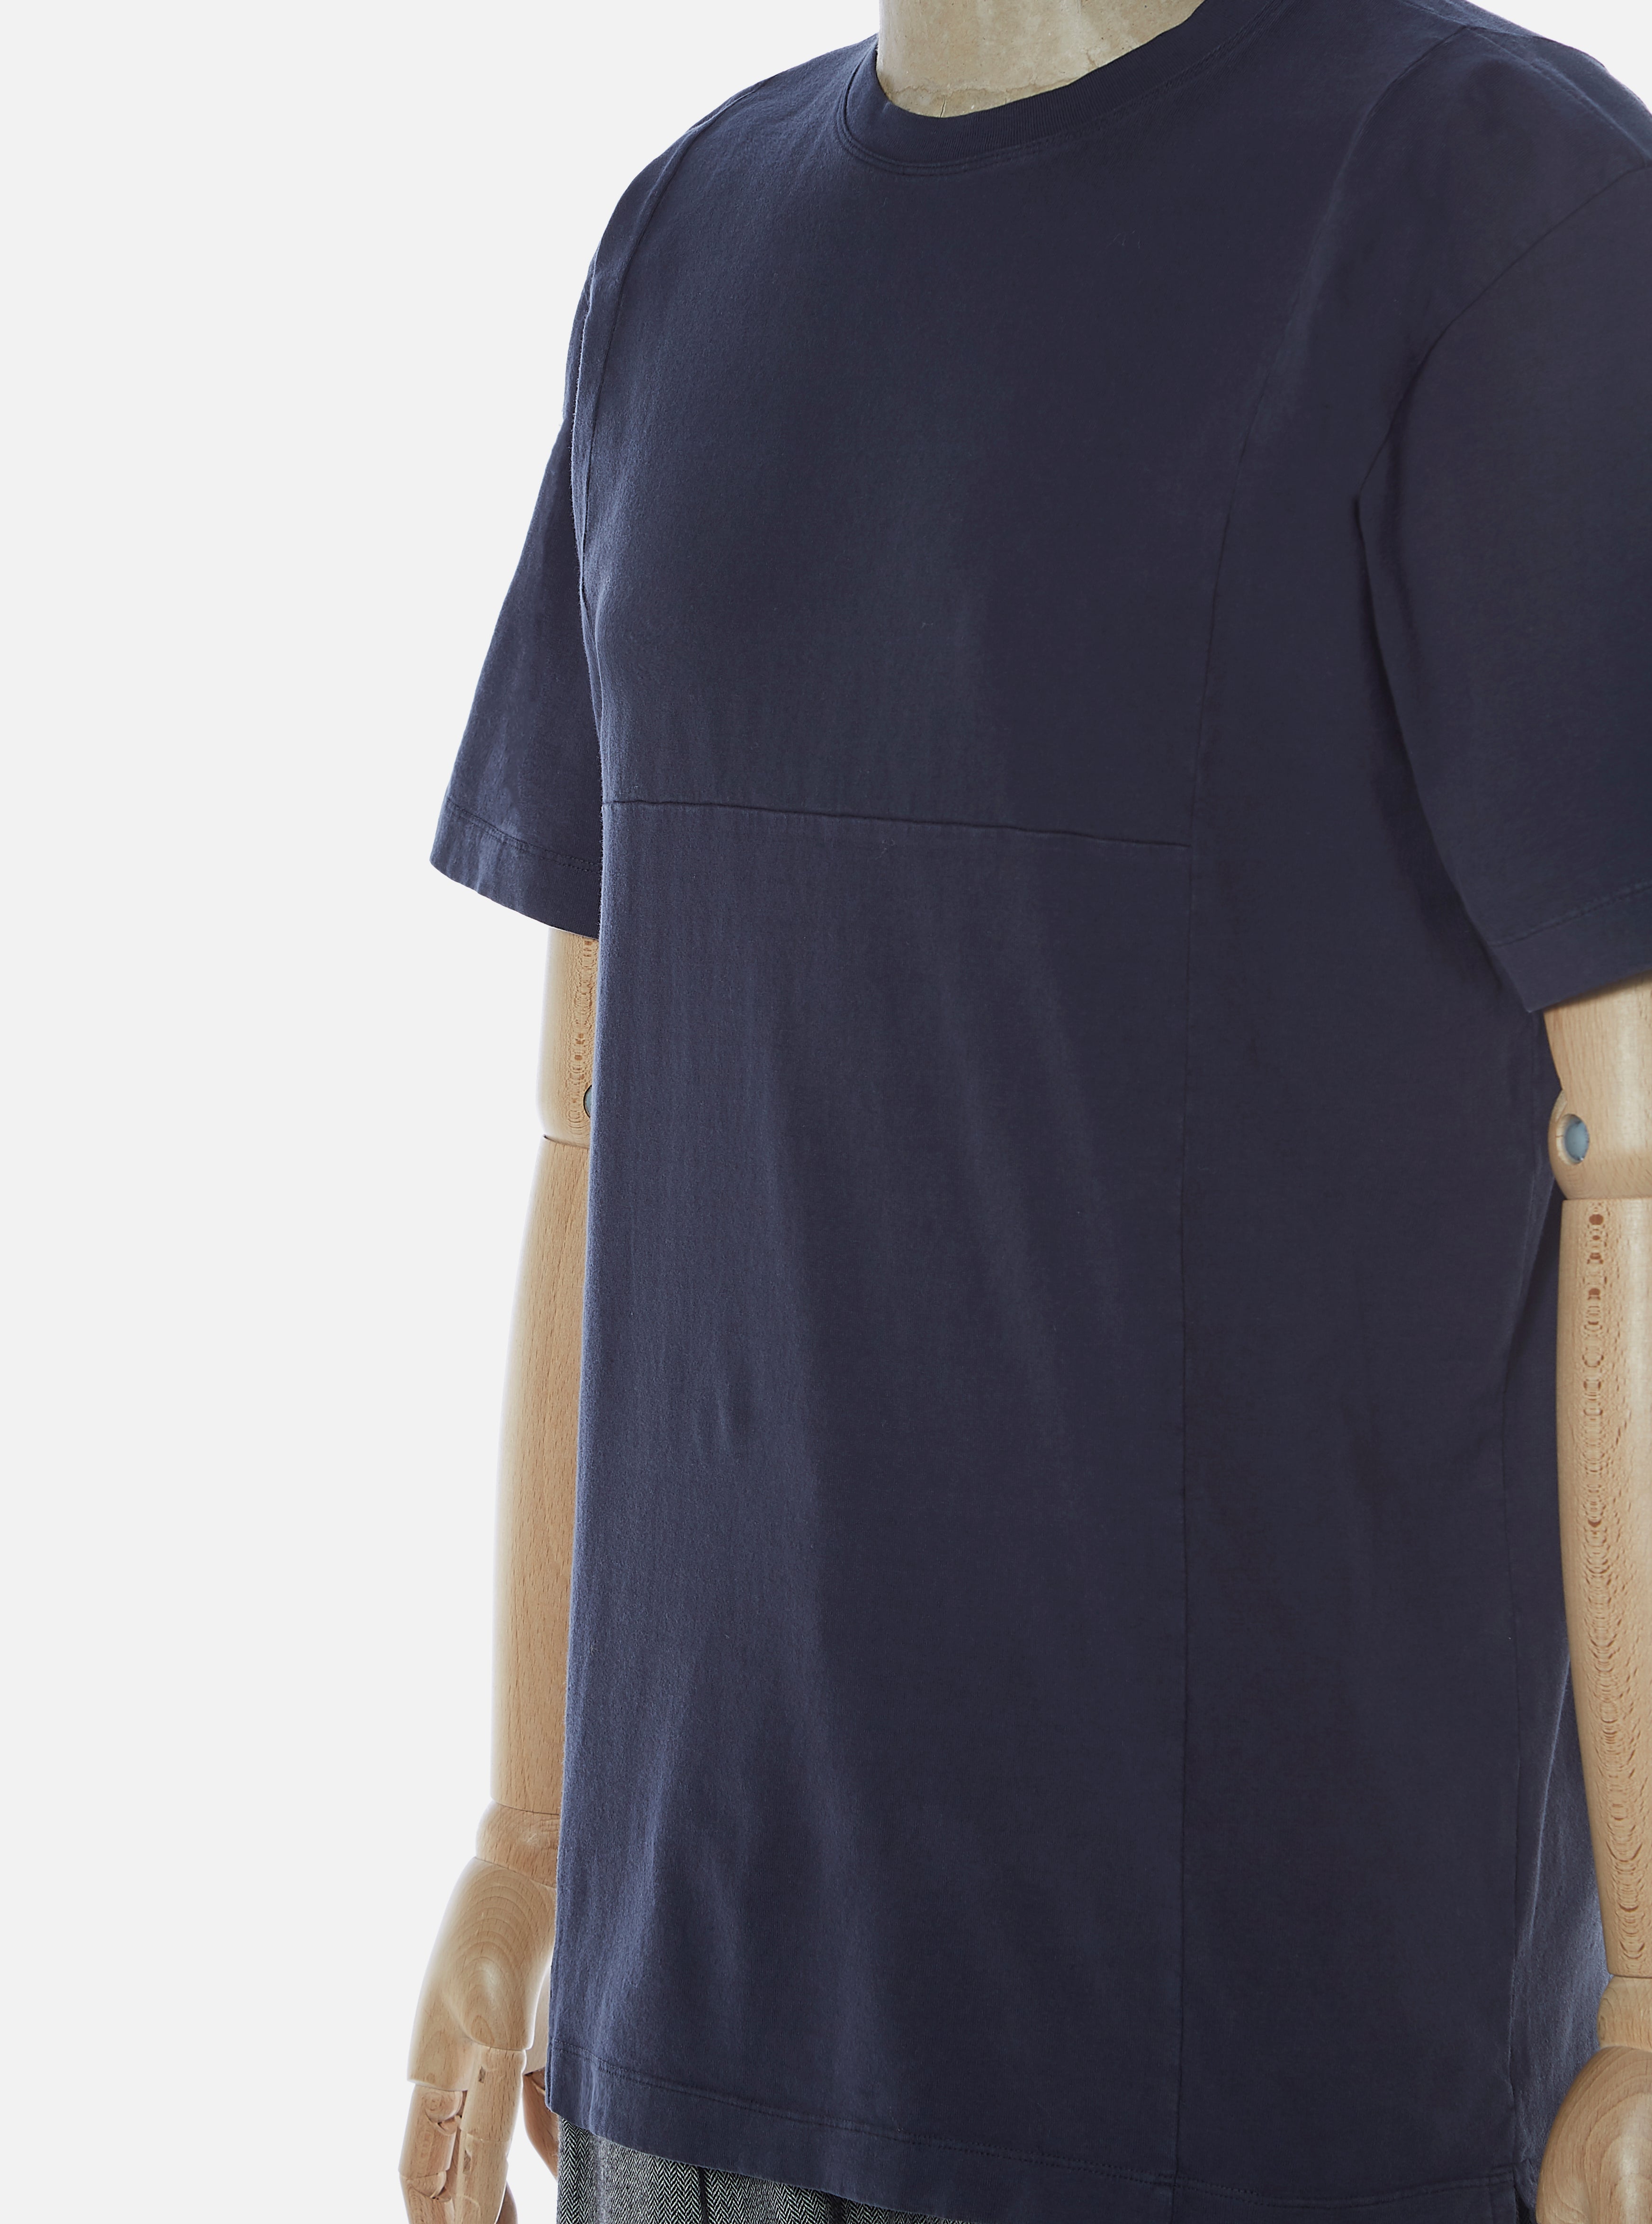 The Pilgrm x Universal Works Panel Tee in Navy Single Jersey